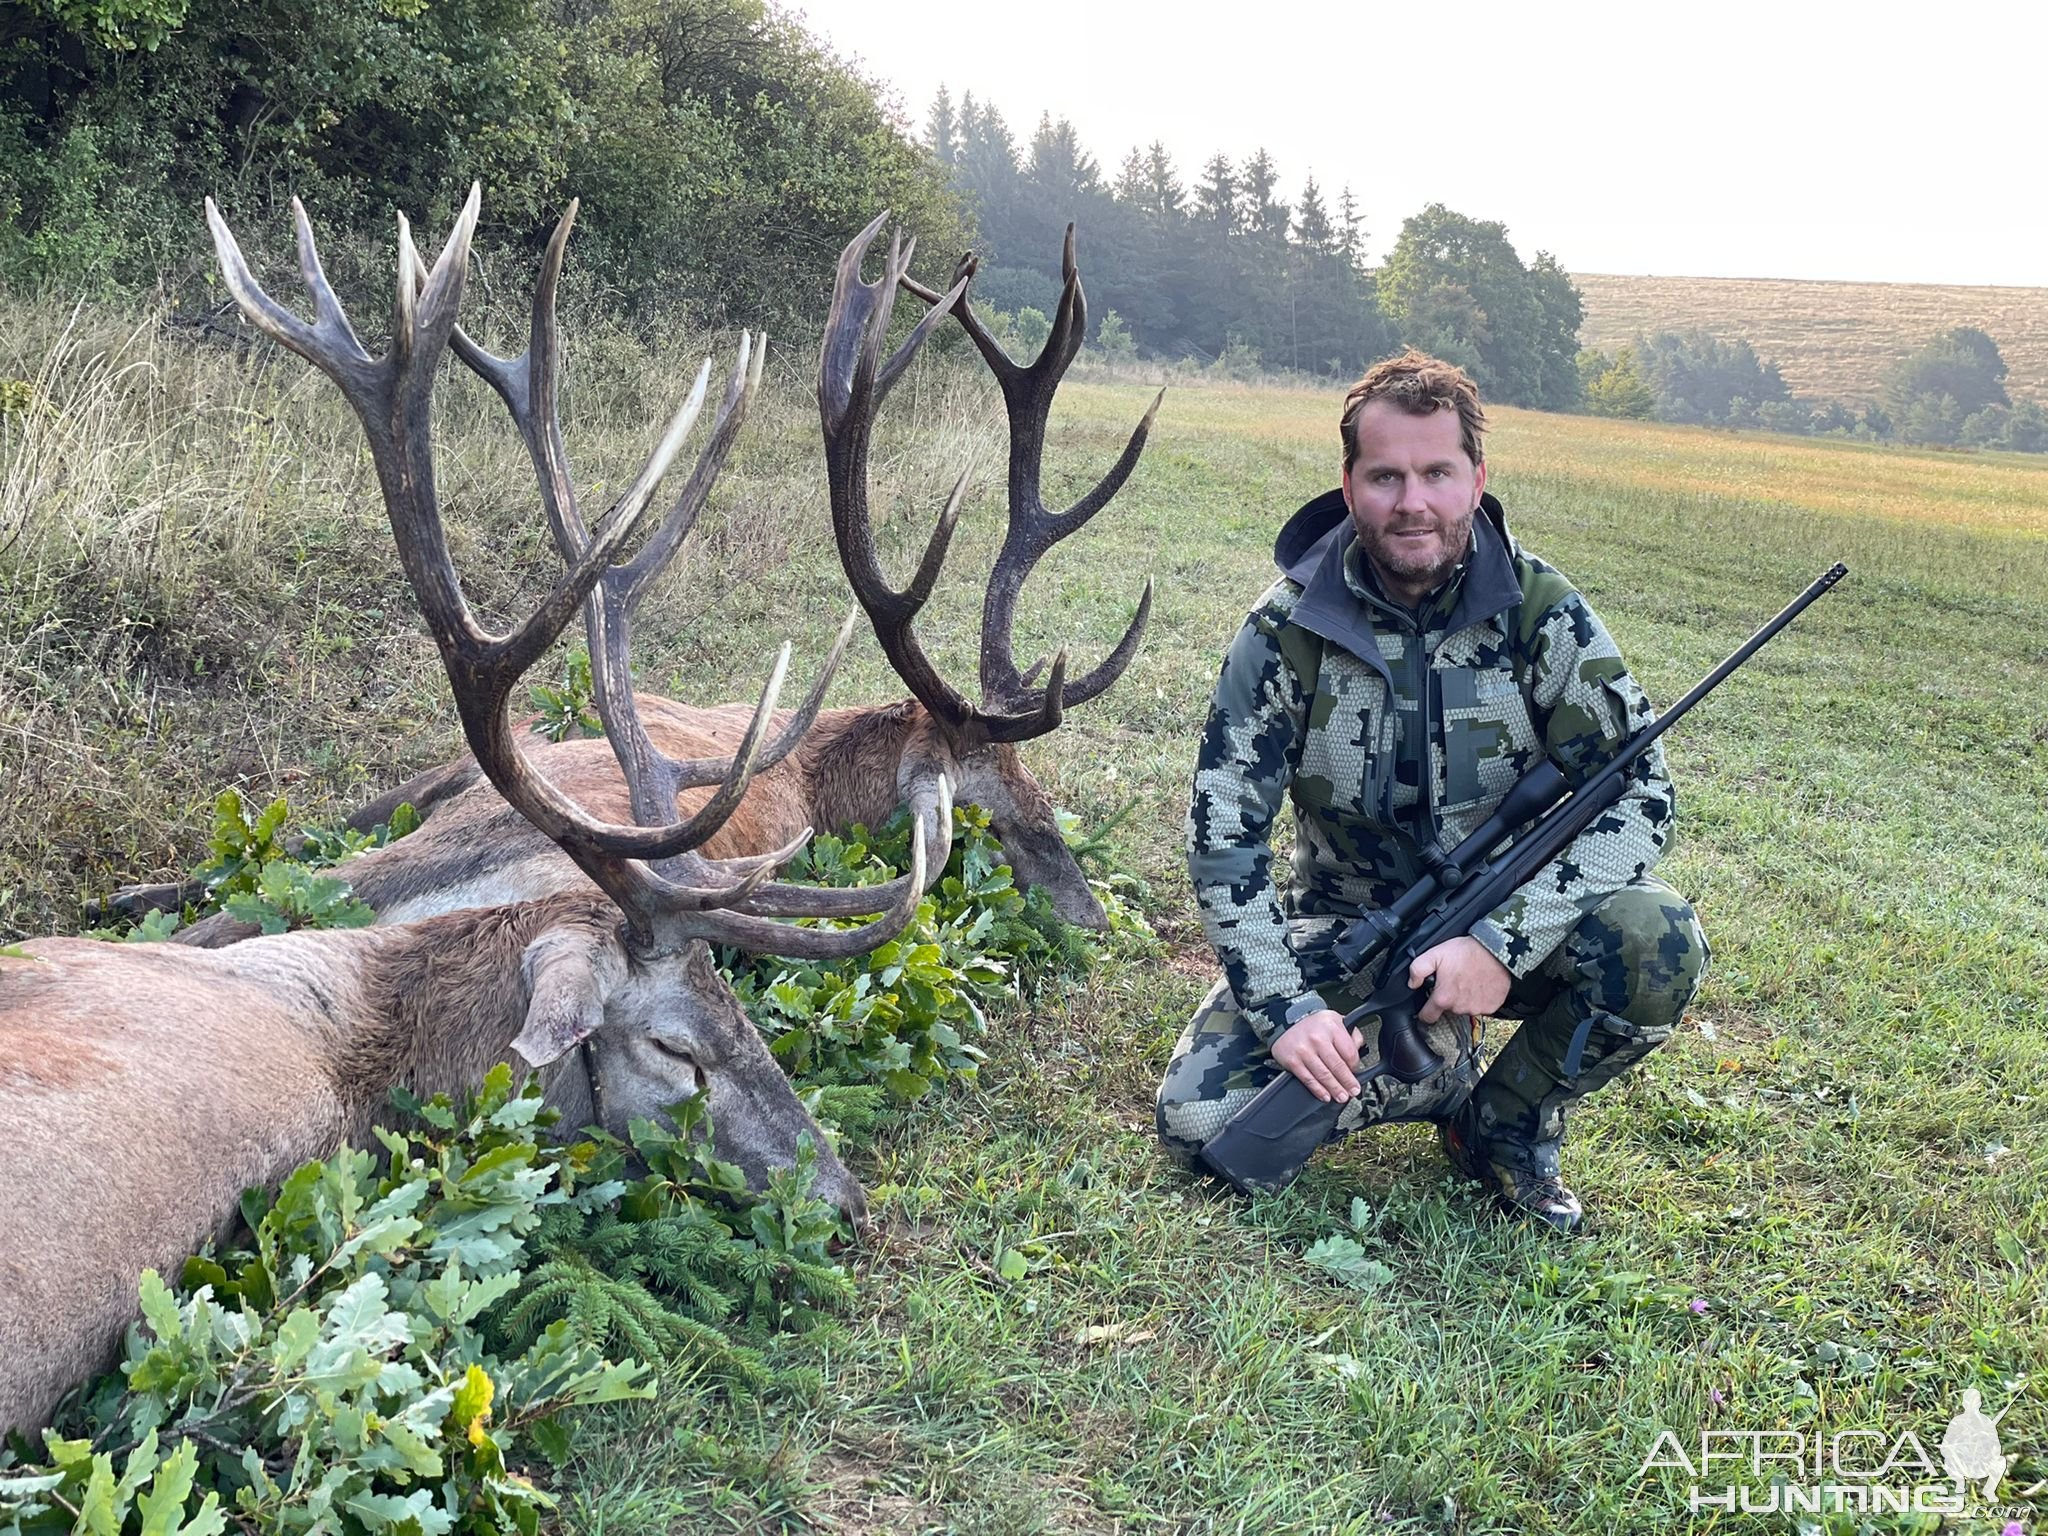 Red Stag Hunting Romania | AfricaHunting.com